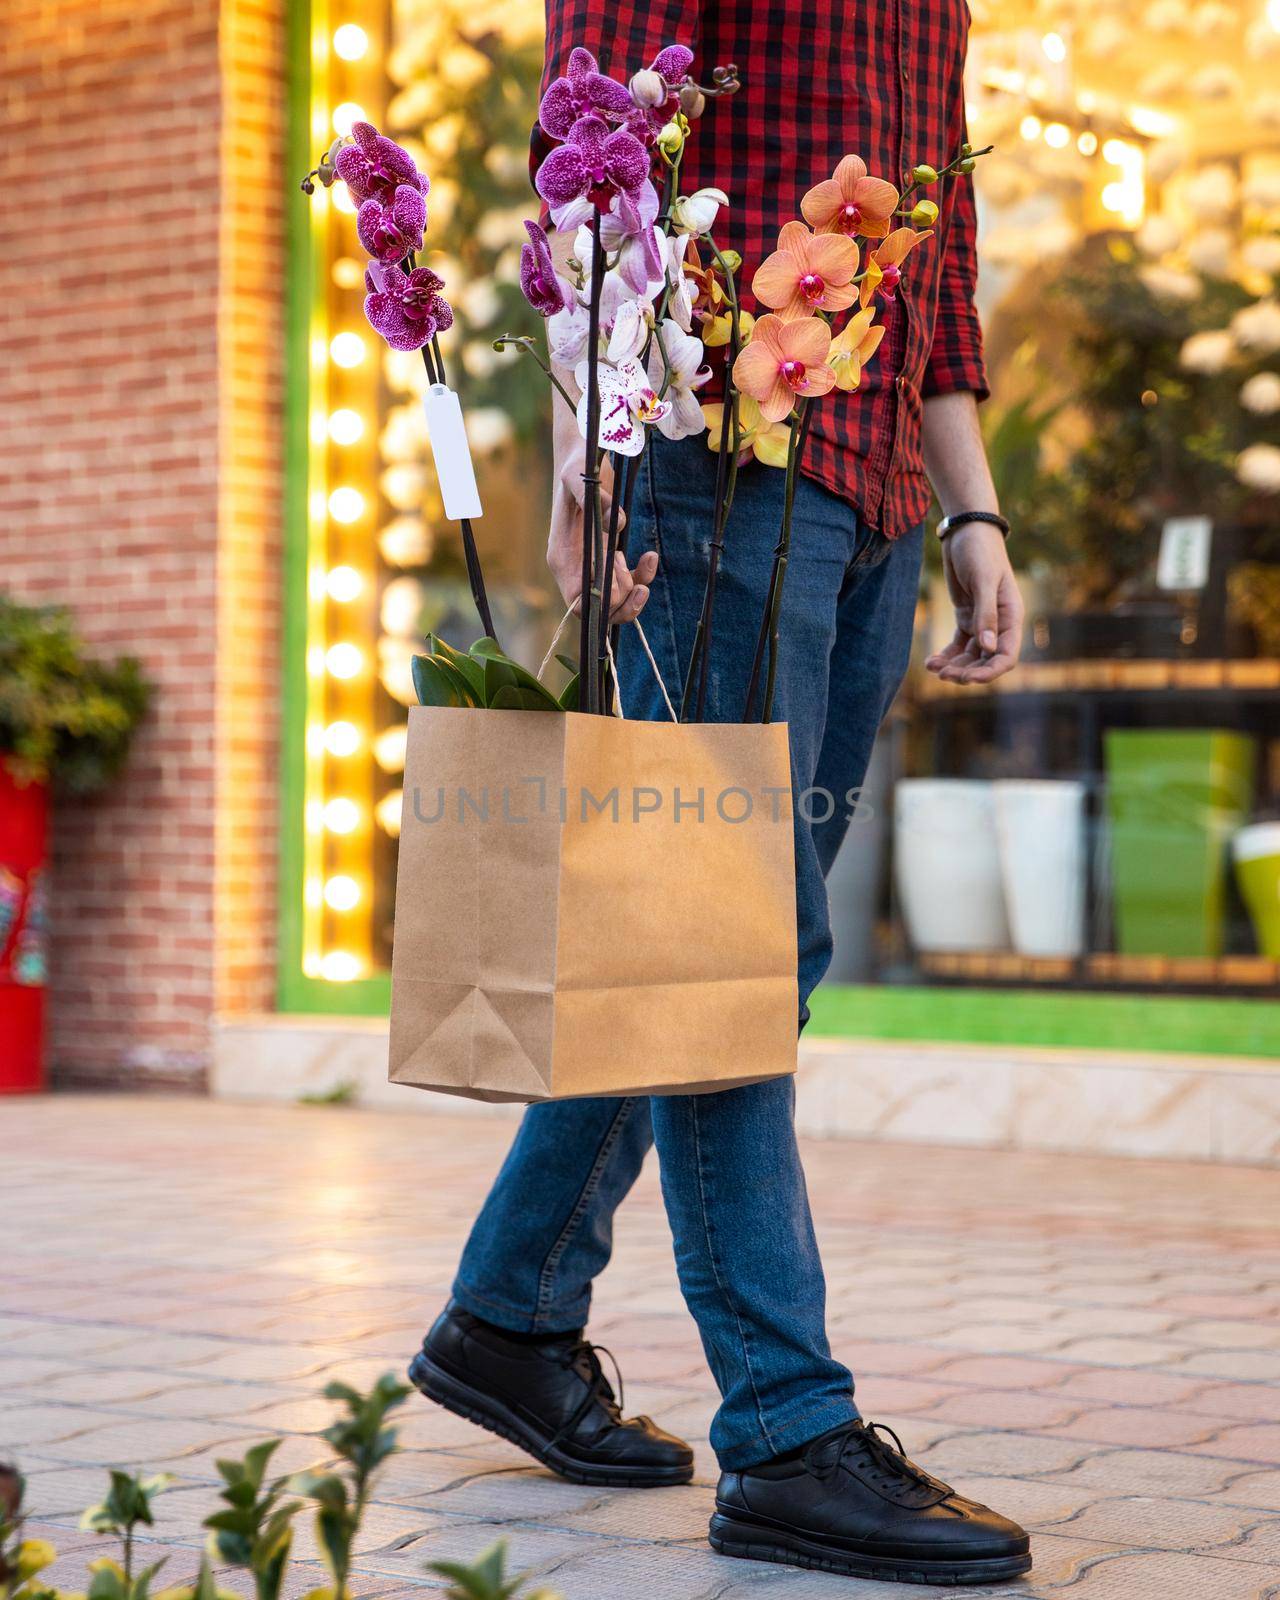 Man walking with shopping bag inside Moth orchids Phalaenopsis by ferhad